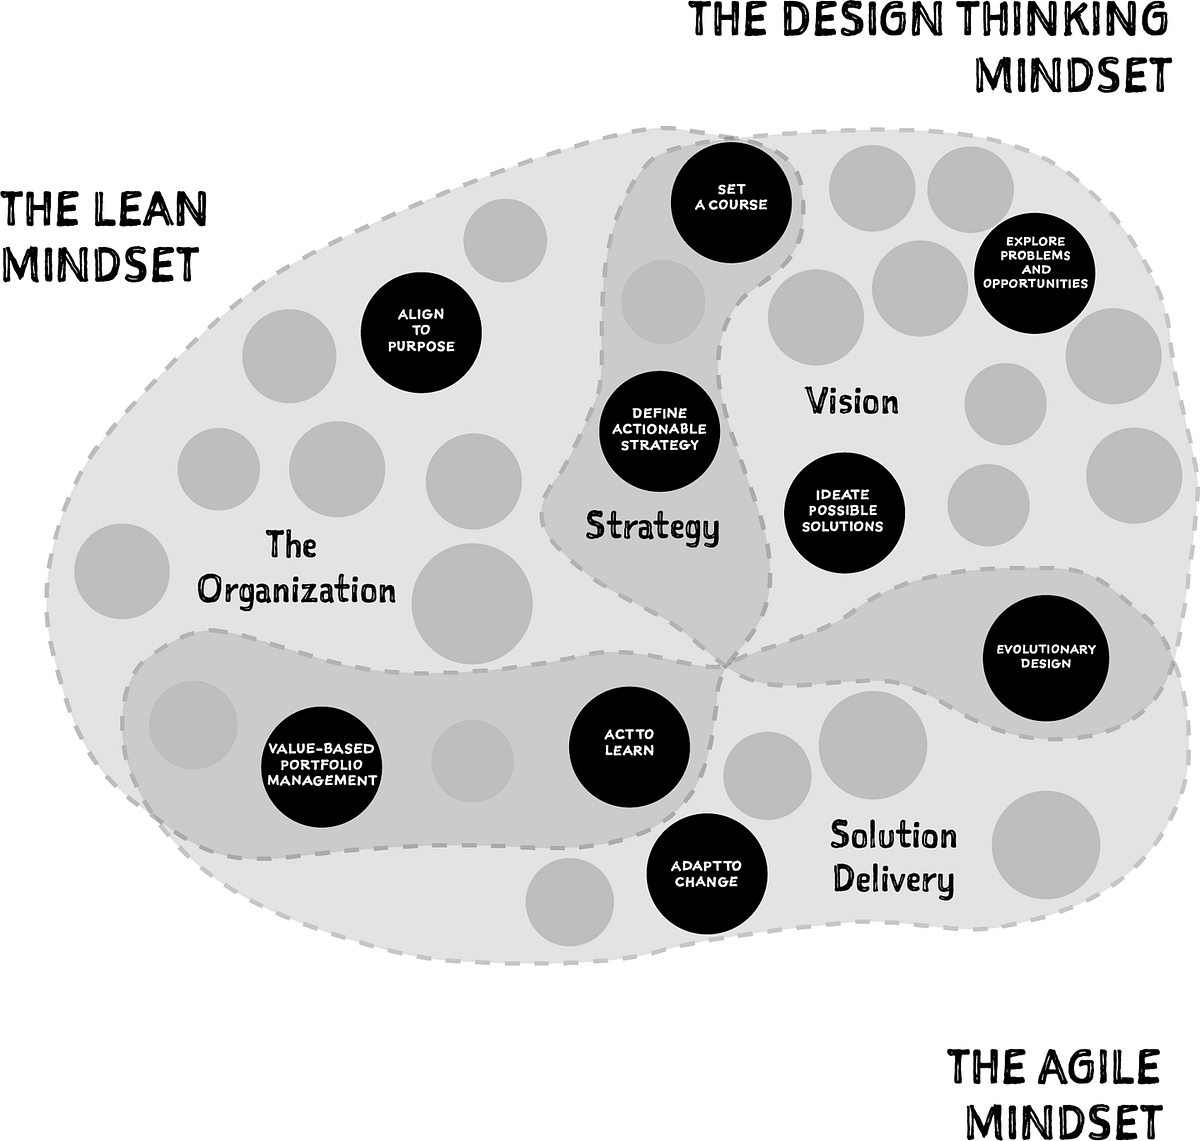 Image connecting The Lean Mindset with The Design Thinking Mindset and The Agile Mindset